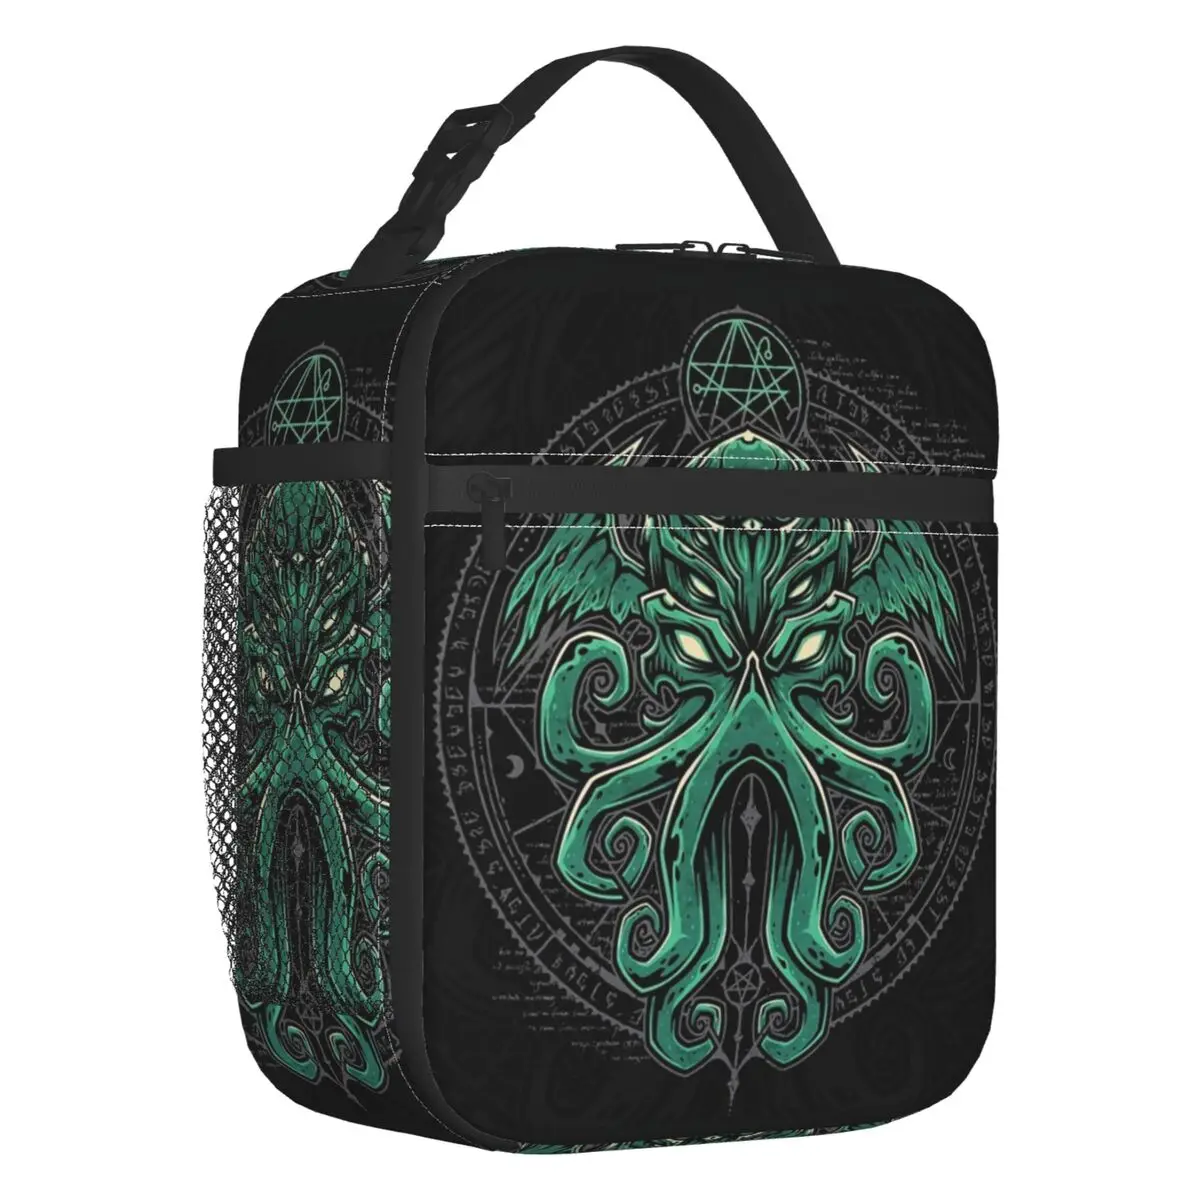 Lovecraft Great Cthulhu Insulated Lunch Tote Bag Horror Monster Octopus Tentacle Resuable Thermal Cooler Bento Box Work School